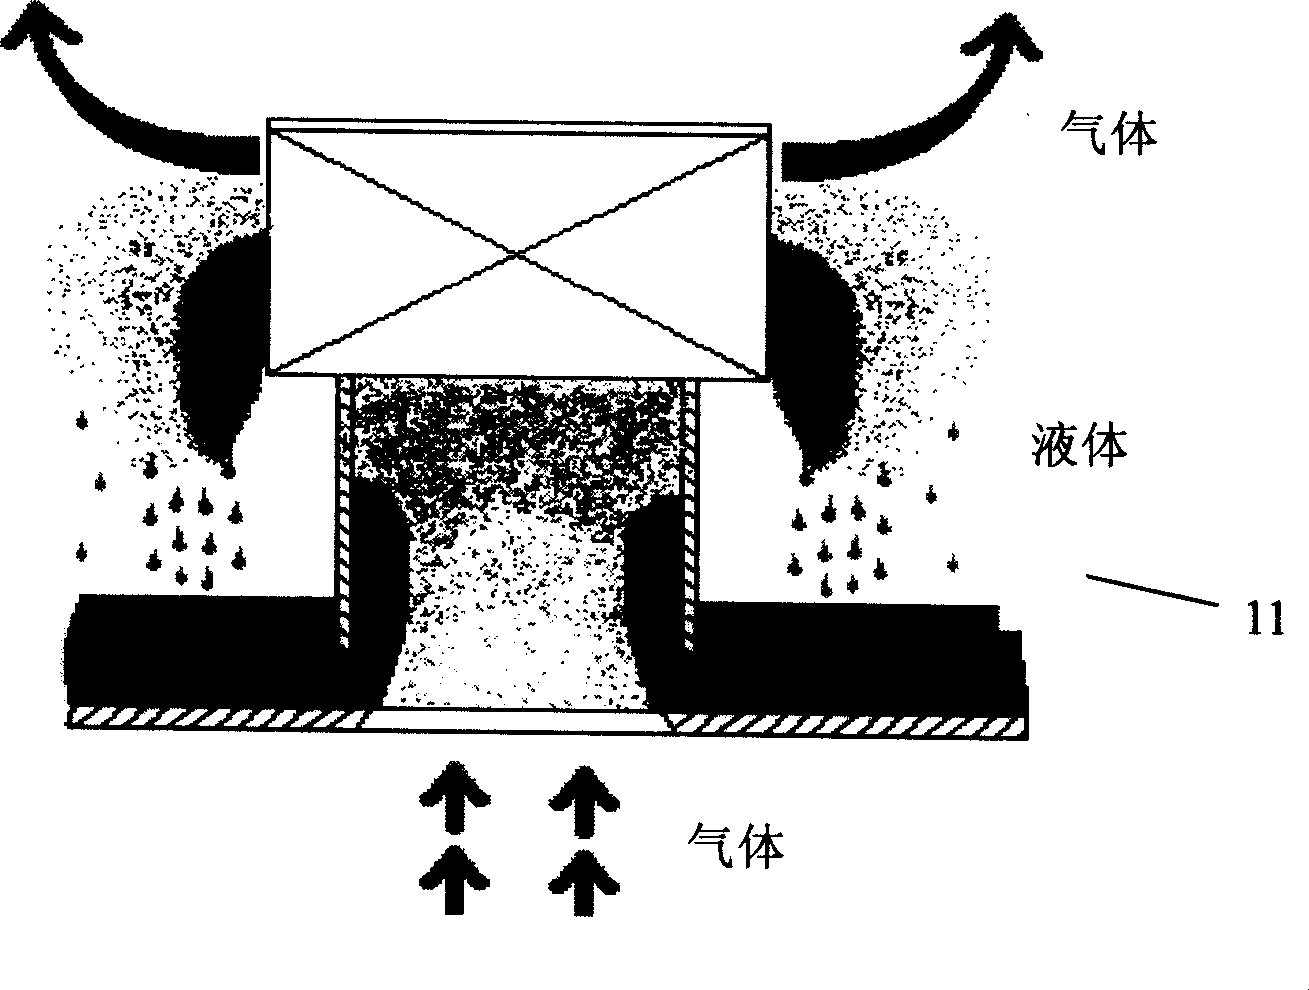 Waste gas treatment equipment employing scrubber and membrane bioreactor and method thereof